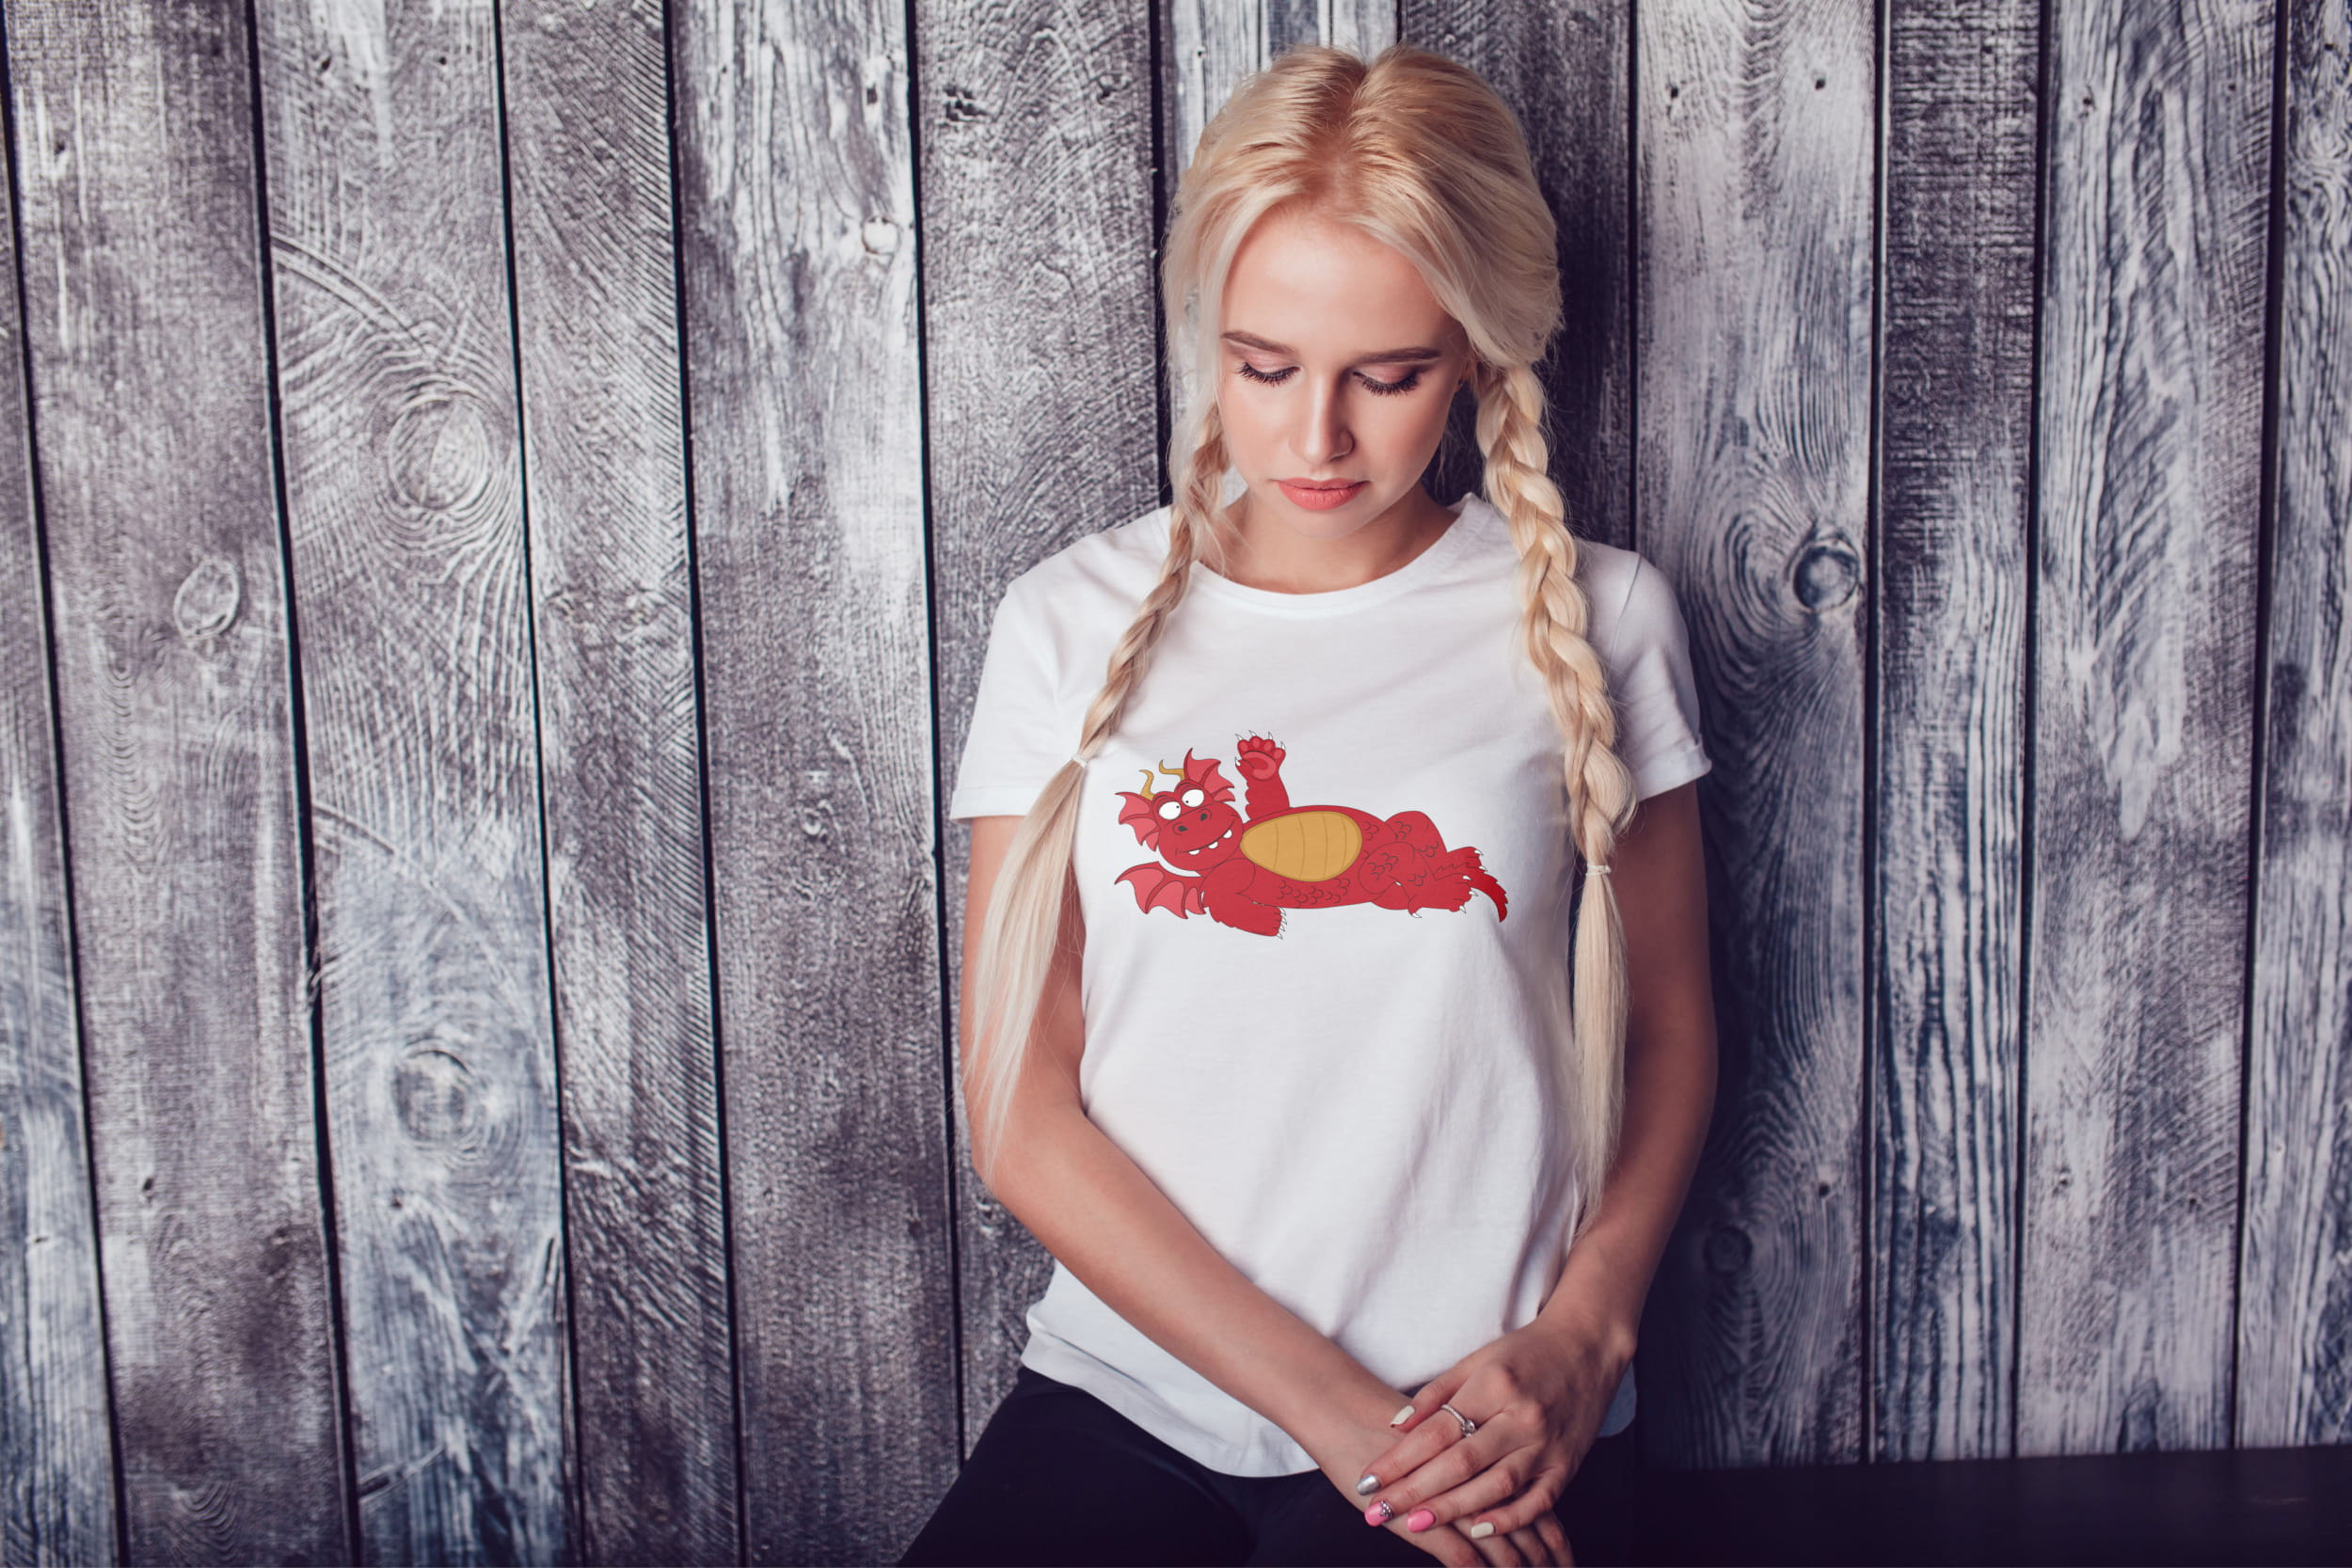 A girl with blond hair and a white T-shirt with a red dragon.